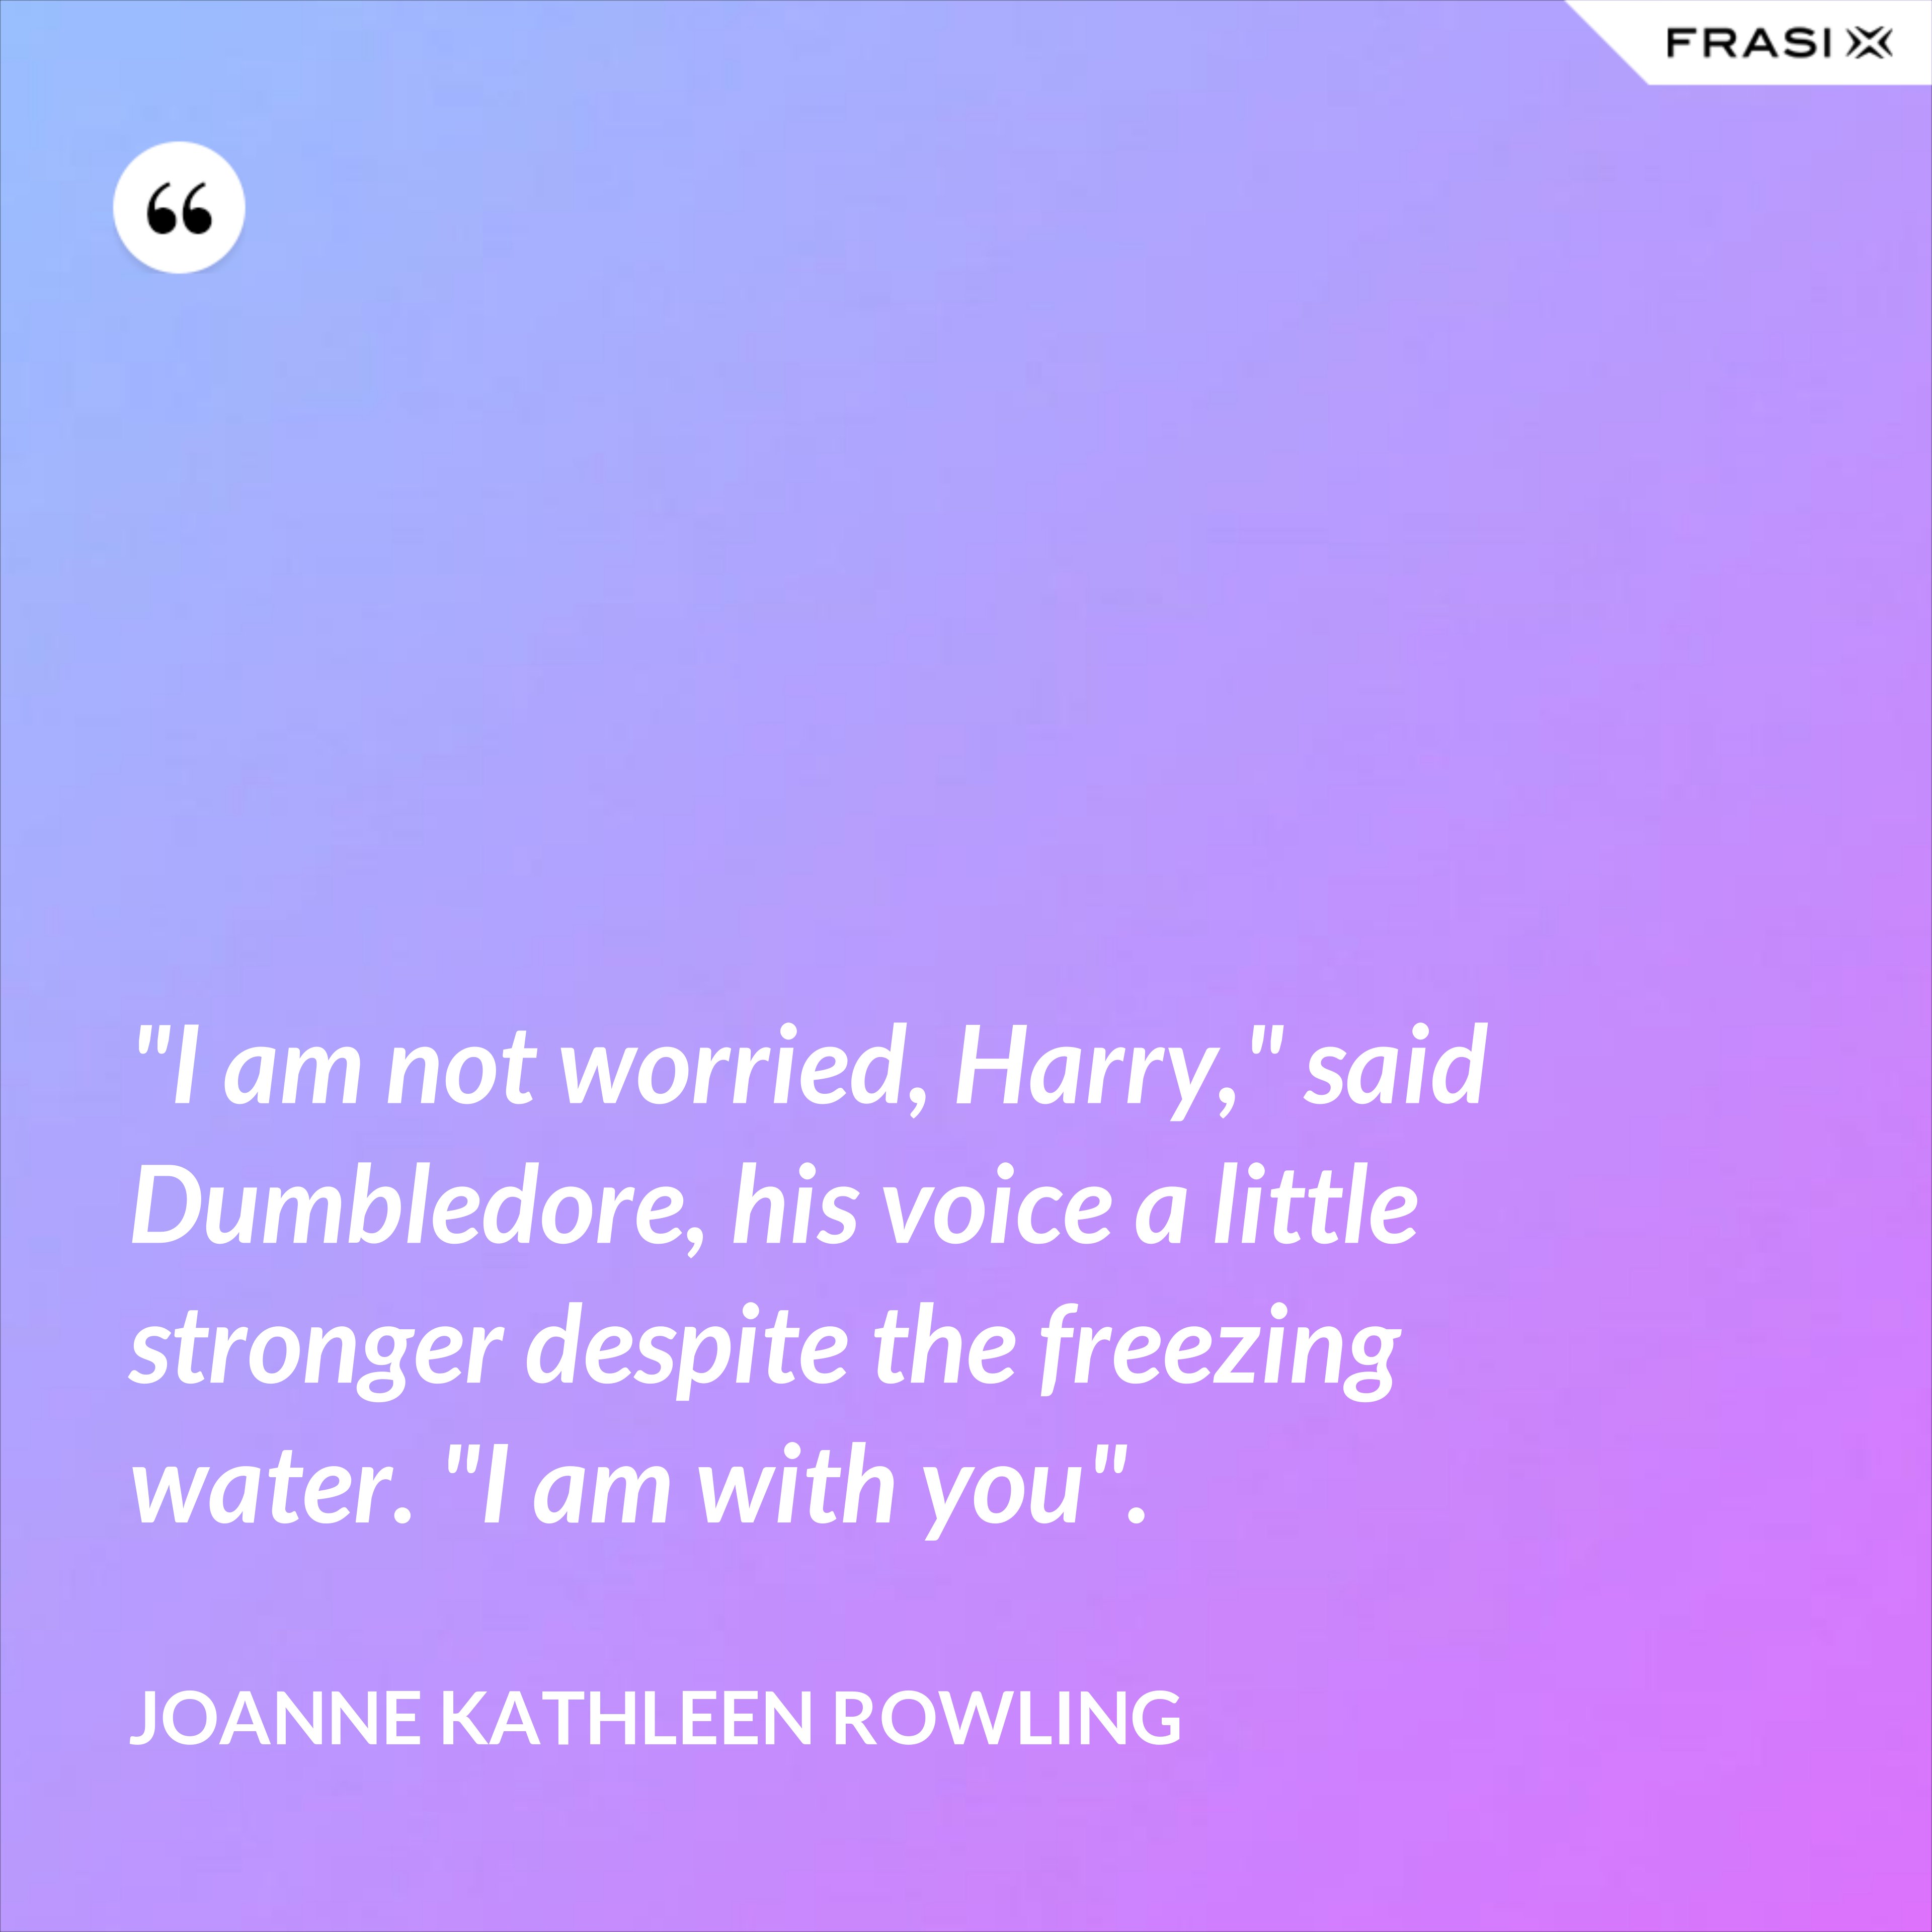 "I am not worried, Harry," said Dumbledore, his voice a little stronger despite the freezing water. "I am with you". - Joanne Kathleen Rowling